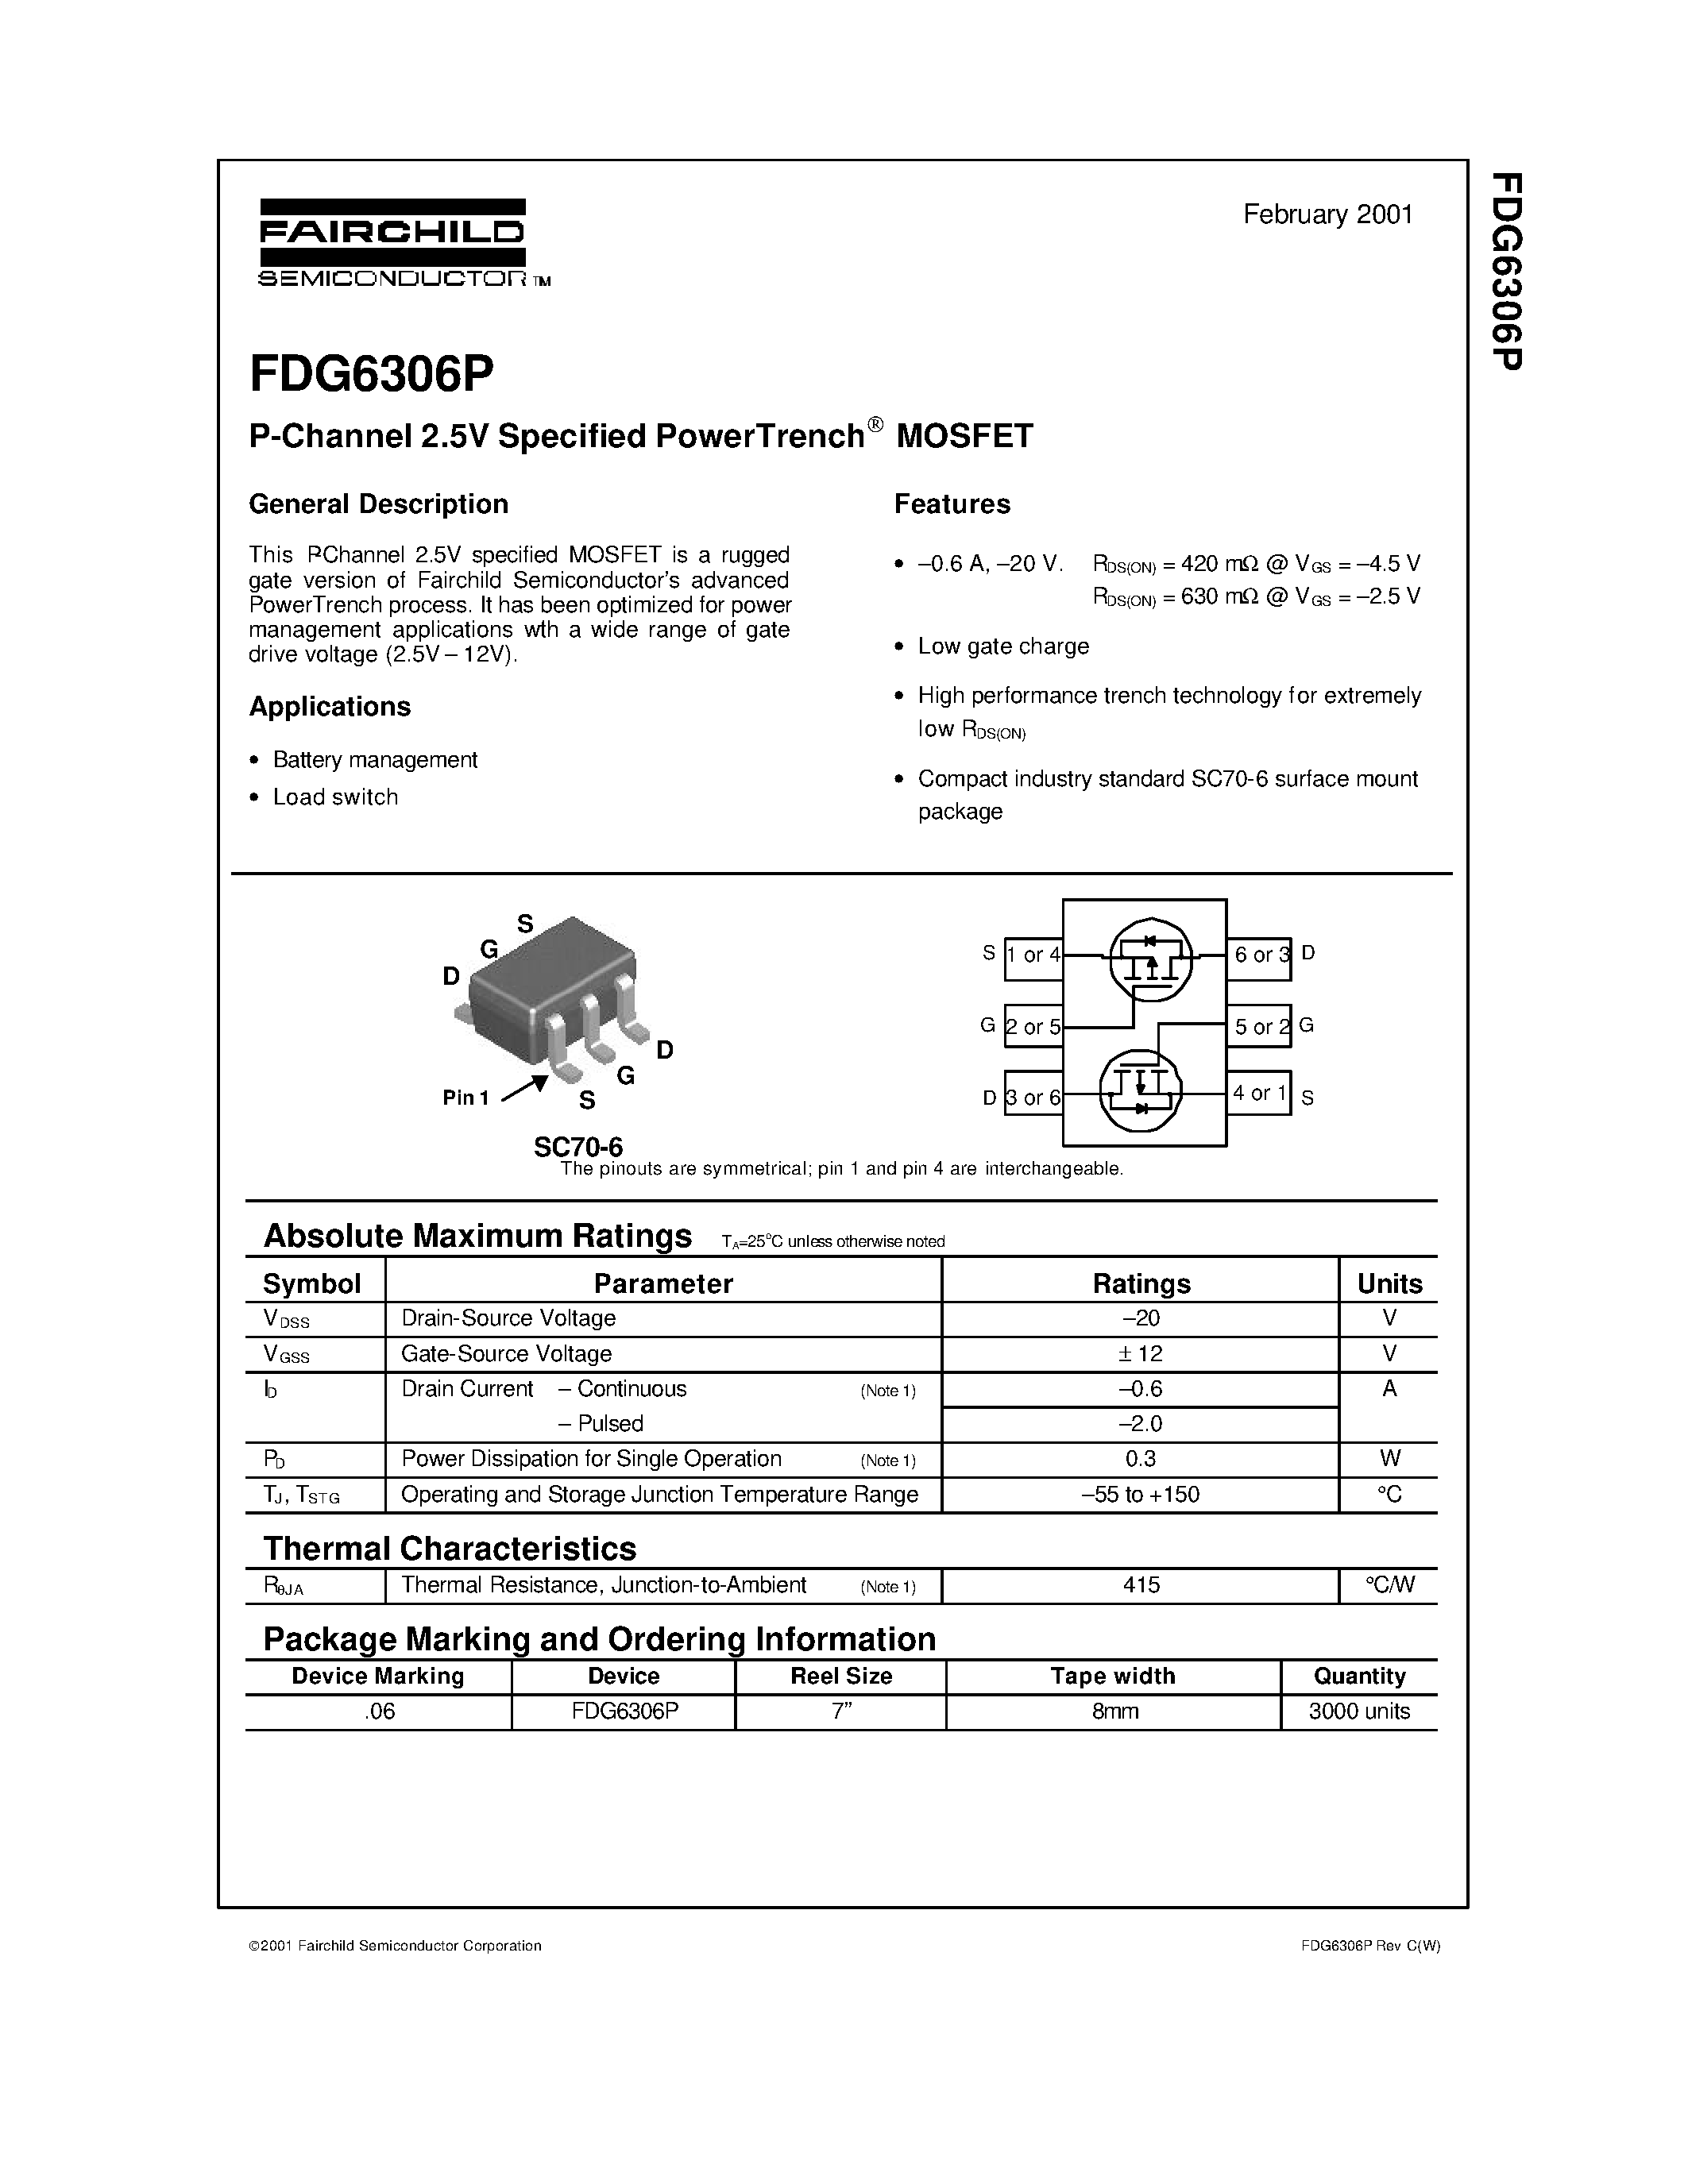 Datasheet FDG6306P - P-Channel 2.5V Specified PowerTrench MOSFET page 1